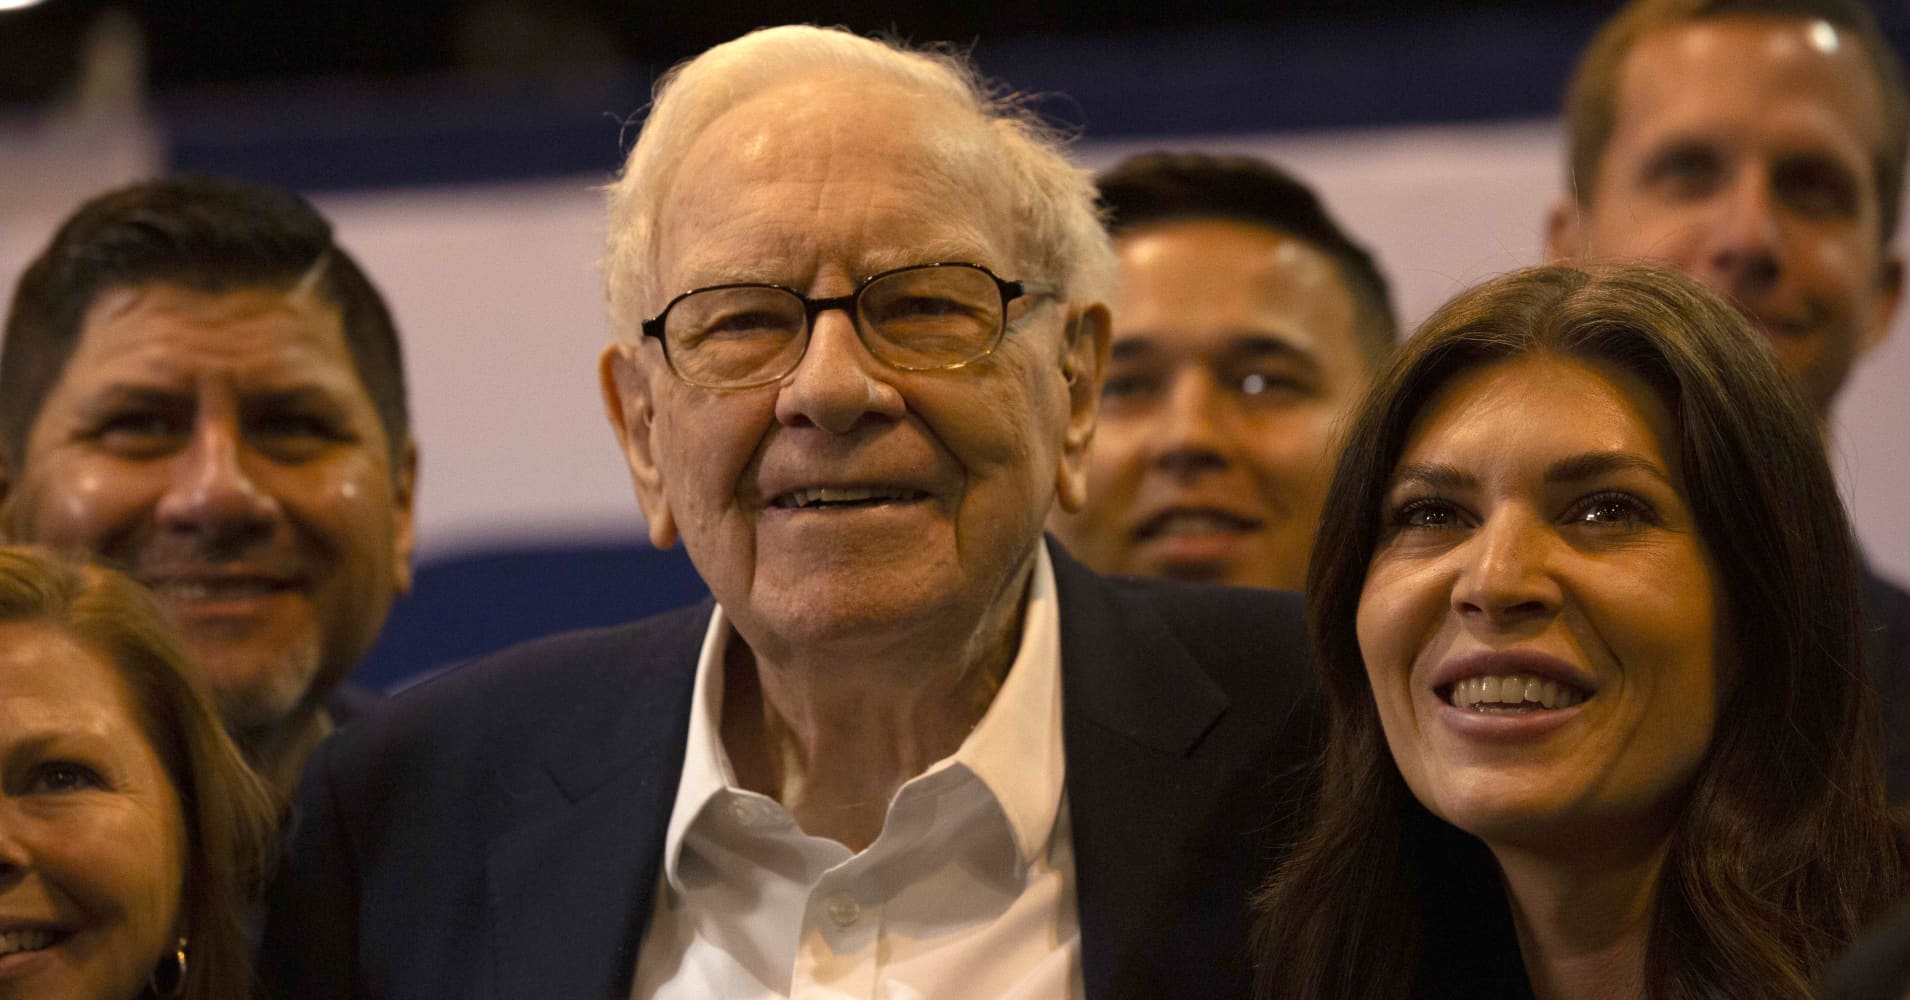 warren buffett mulls over his own mortality at this year's berkshire hathaway annual meeting